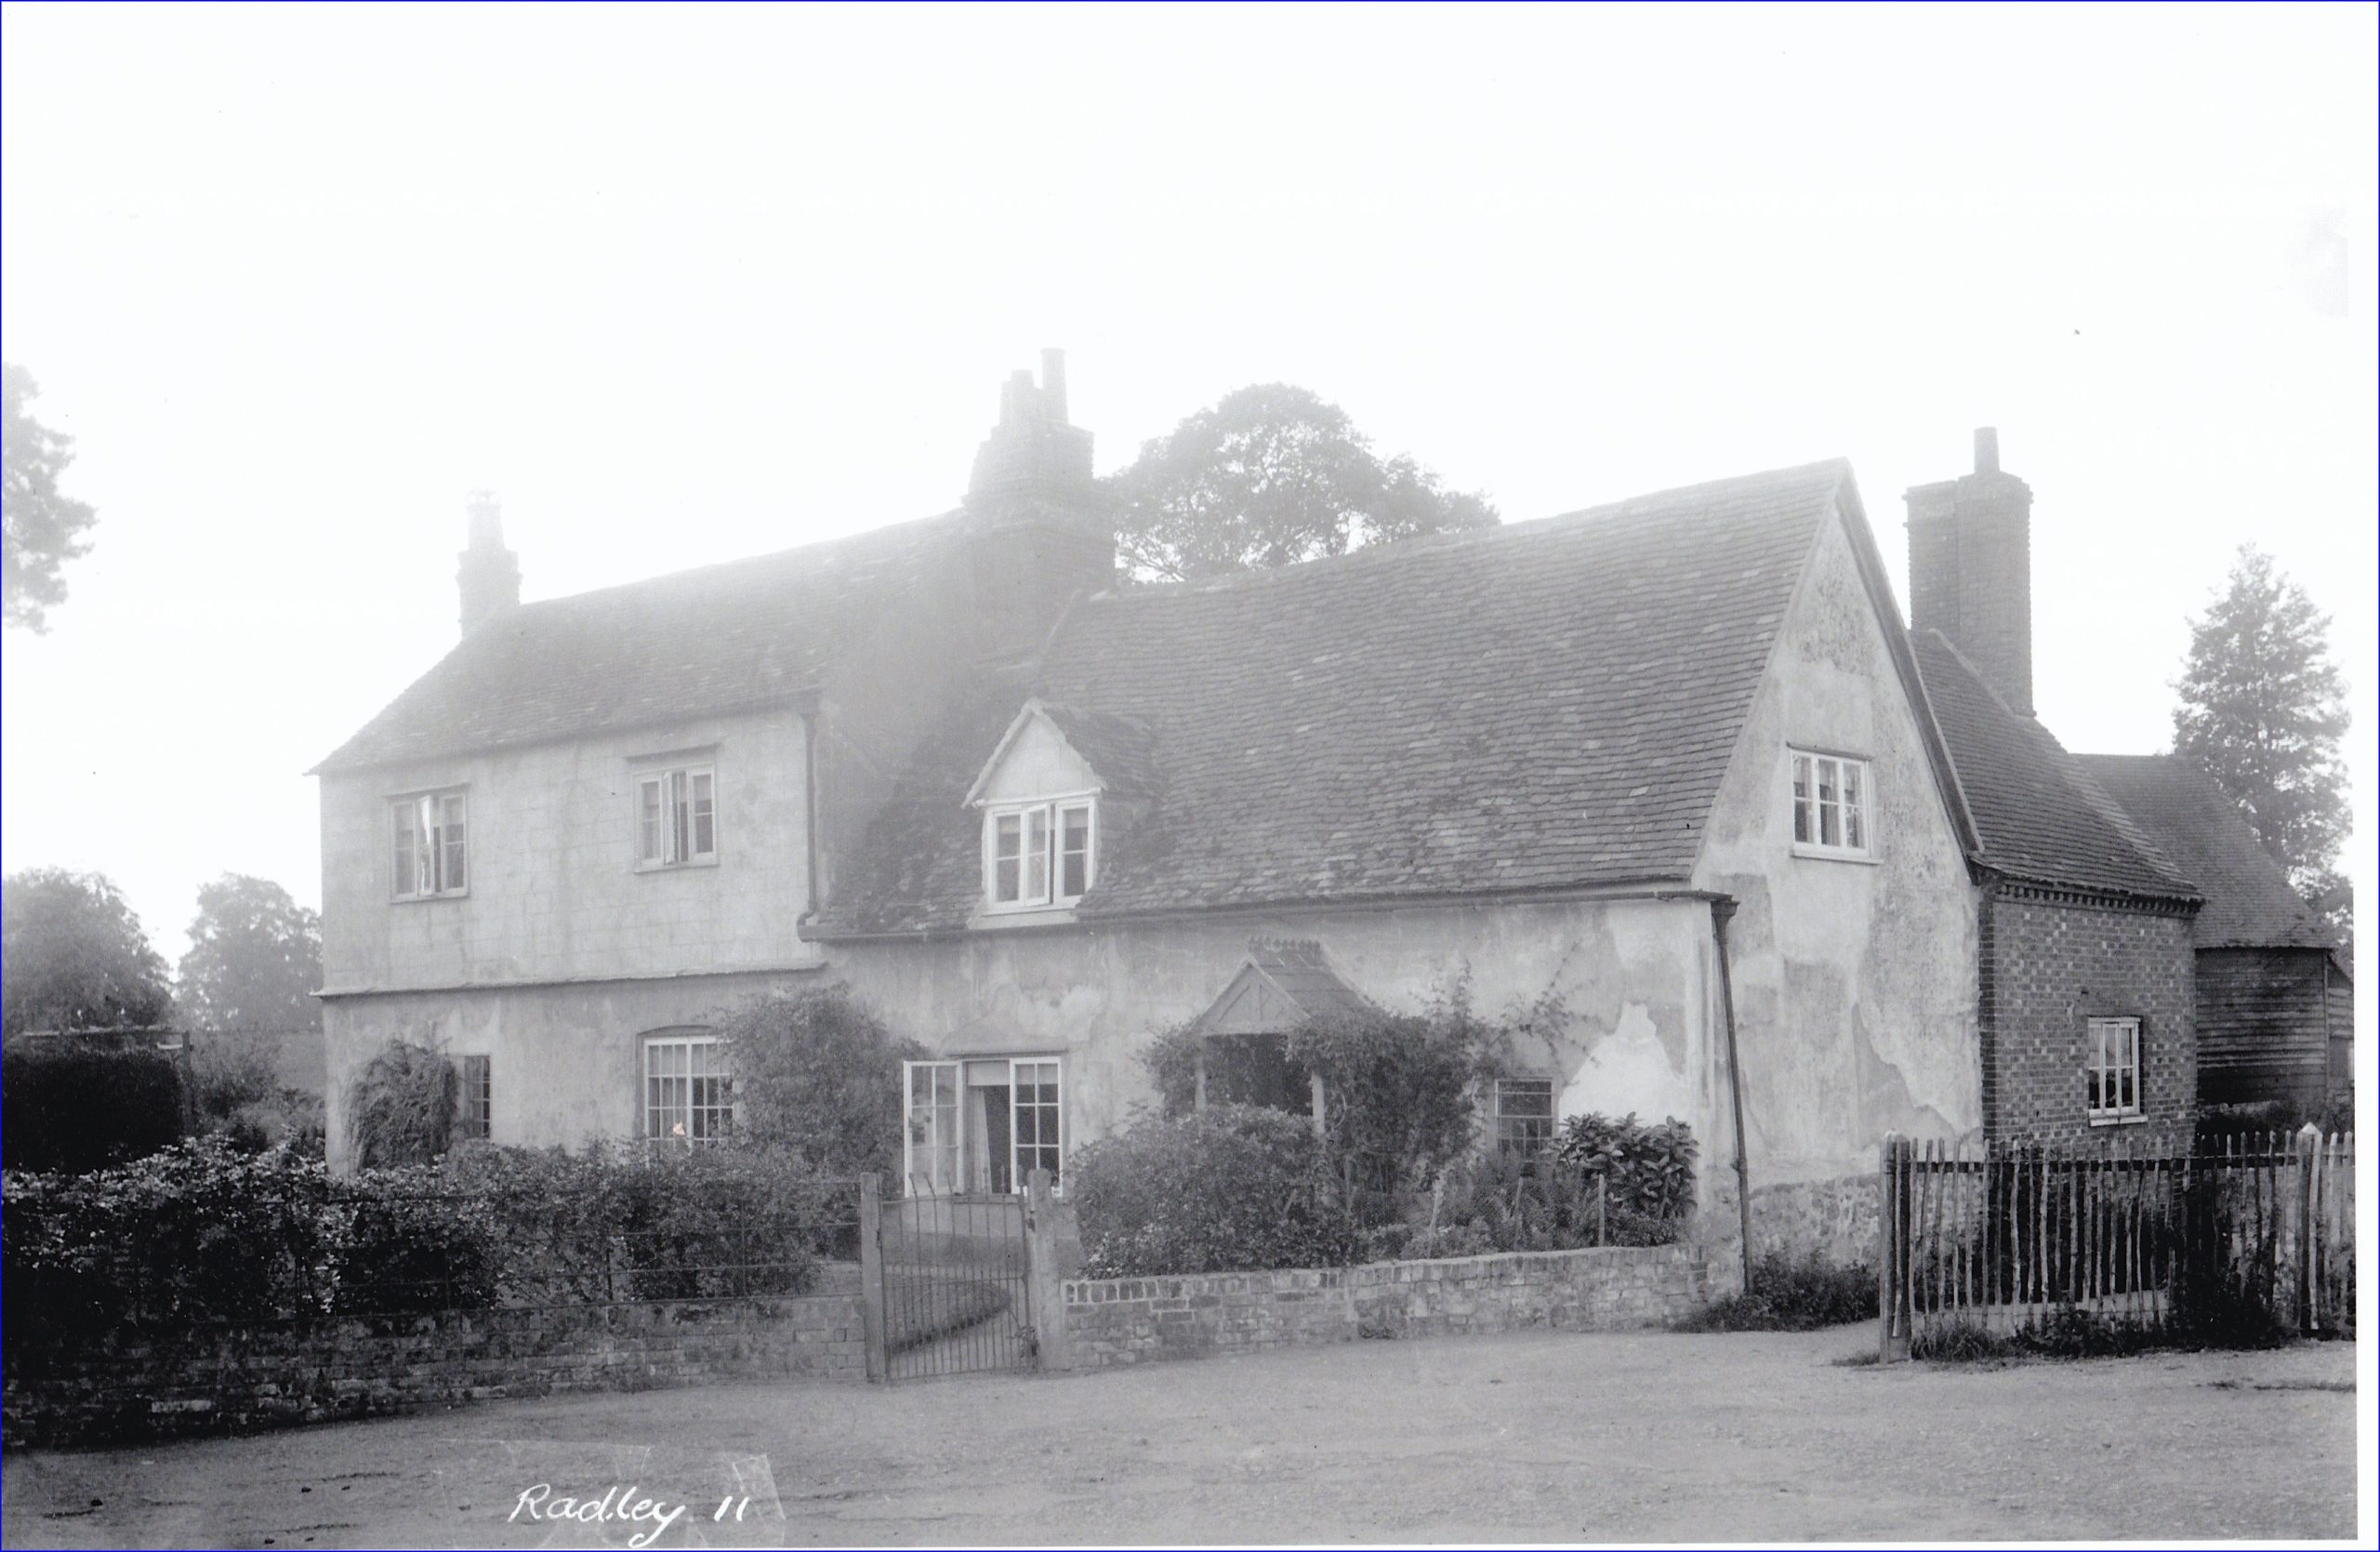 Neat Home Farmhouse in Radley, proably pictured in the 1930s